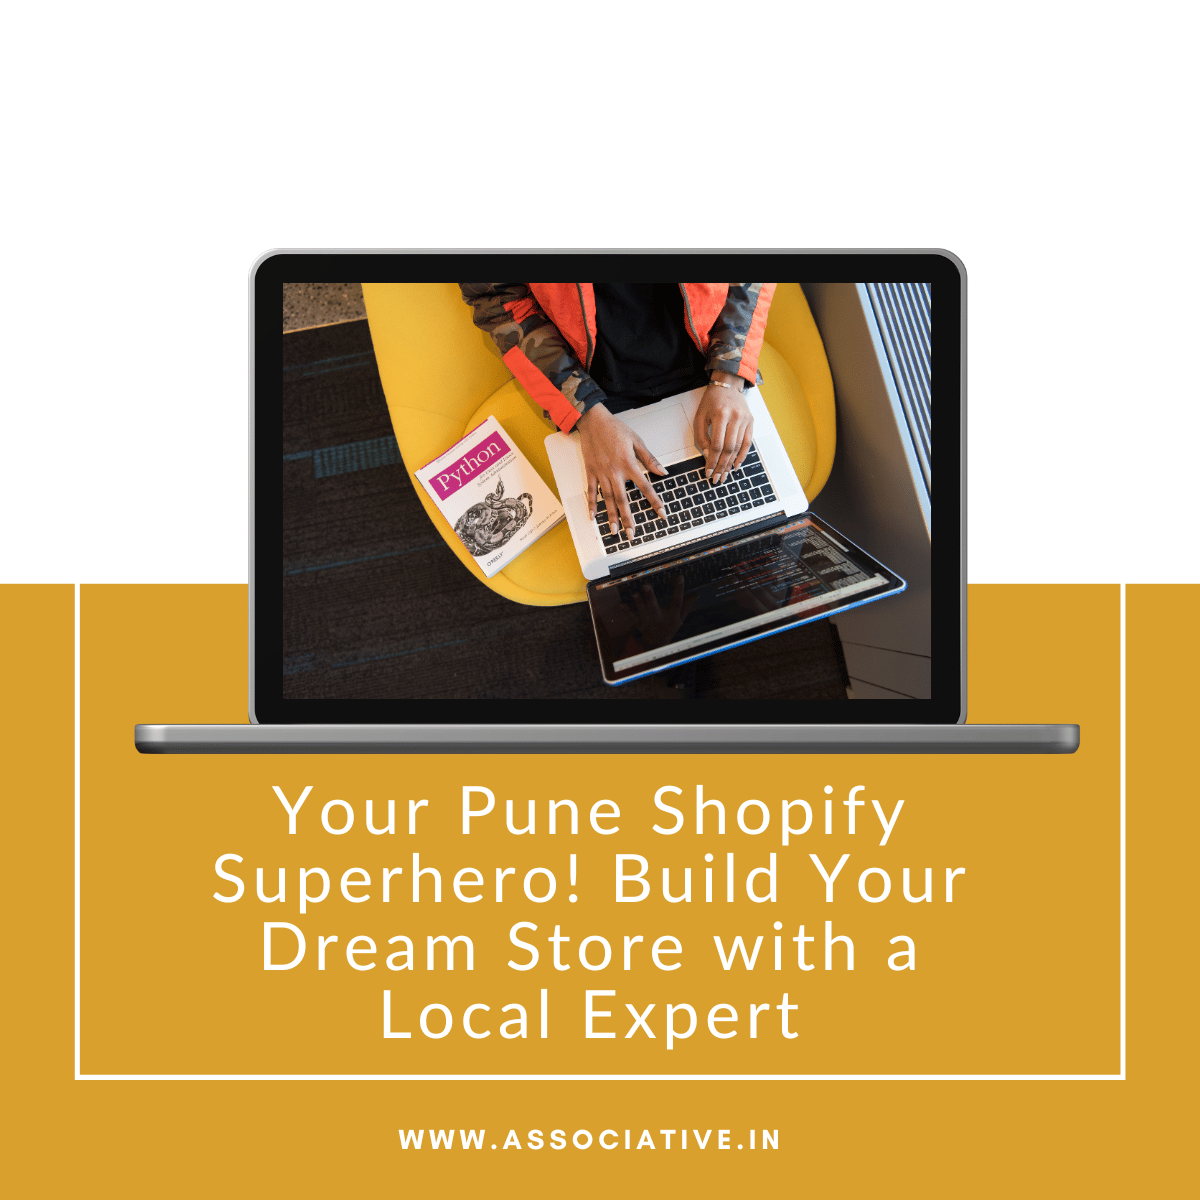 Your Pune Shopify Superhero! Build Your Dream Store with a Local Expert